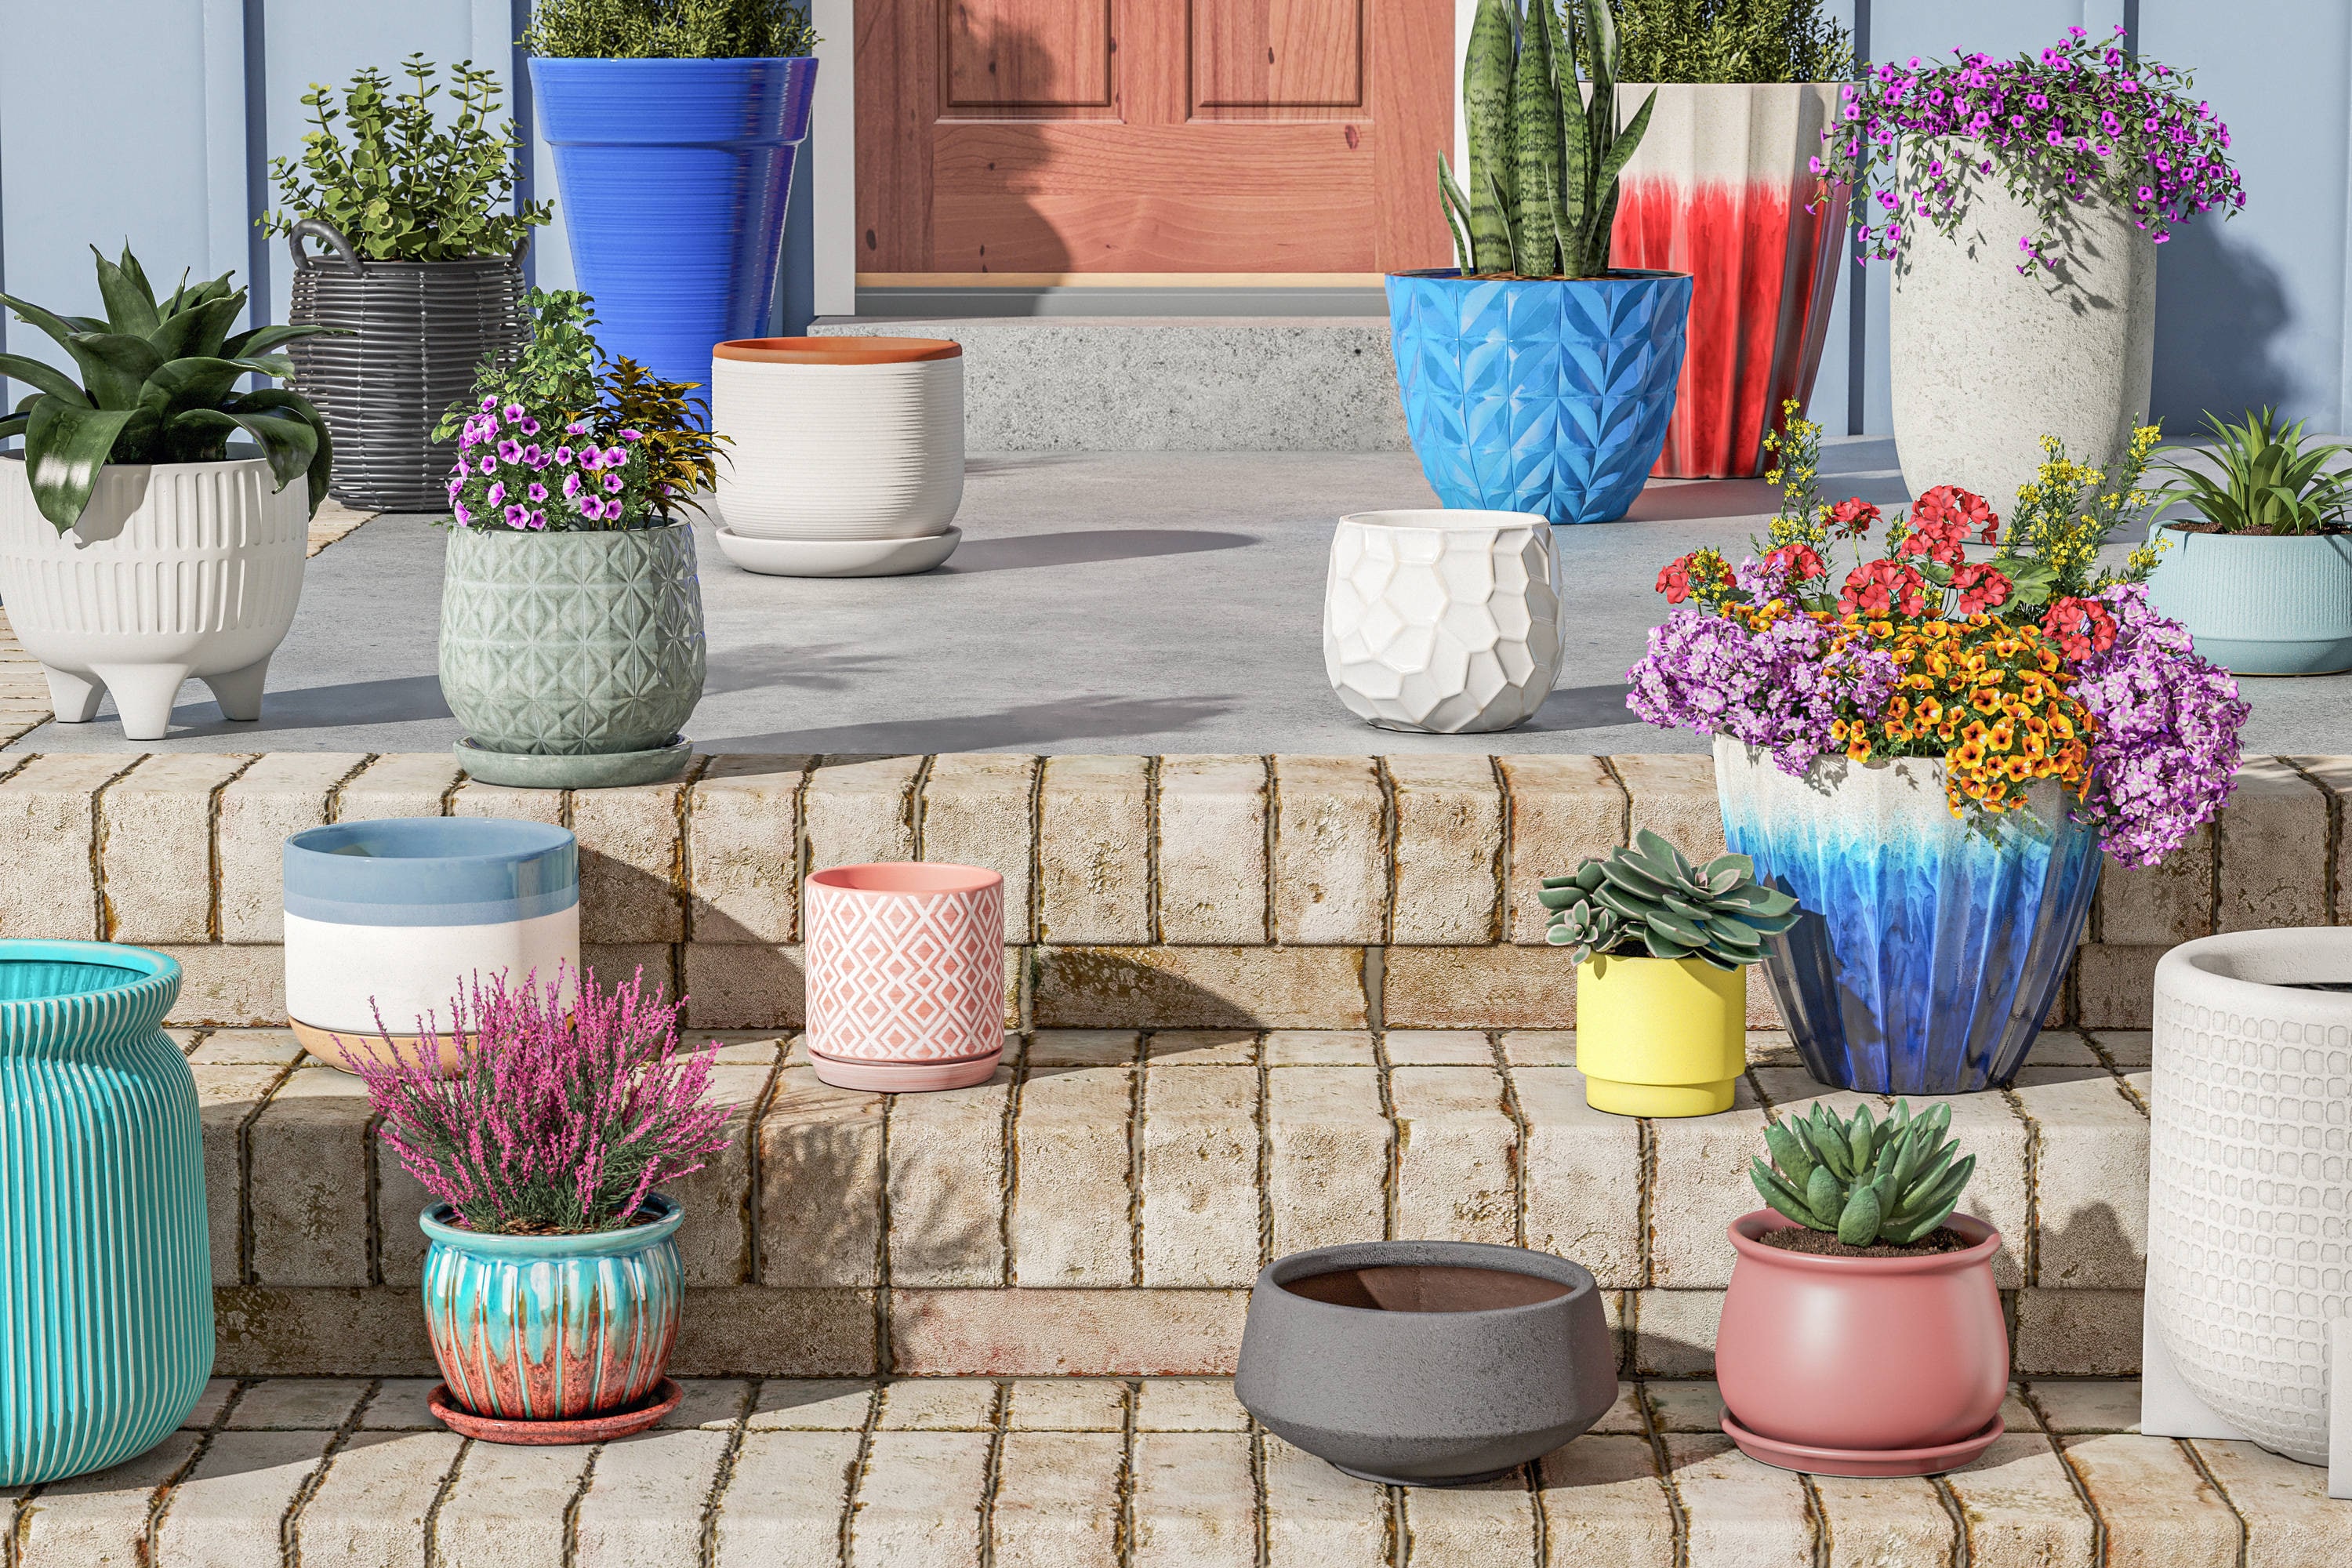 Cheap Plant Pots: Walmart vs. Target vs. Marshalls vs. Consignment Stores!   Where do you get your indoor plant pots? I hit up Walmart, Target,  Marshalls,. and a consignment store to see